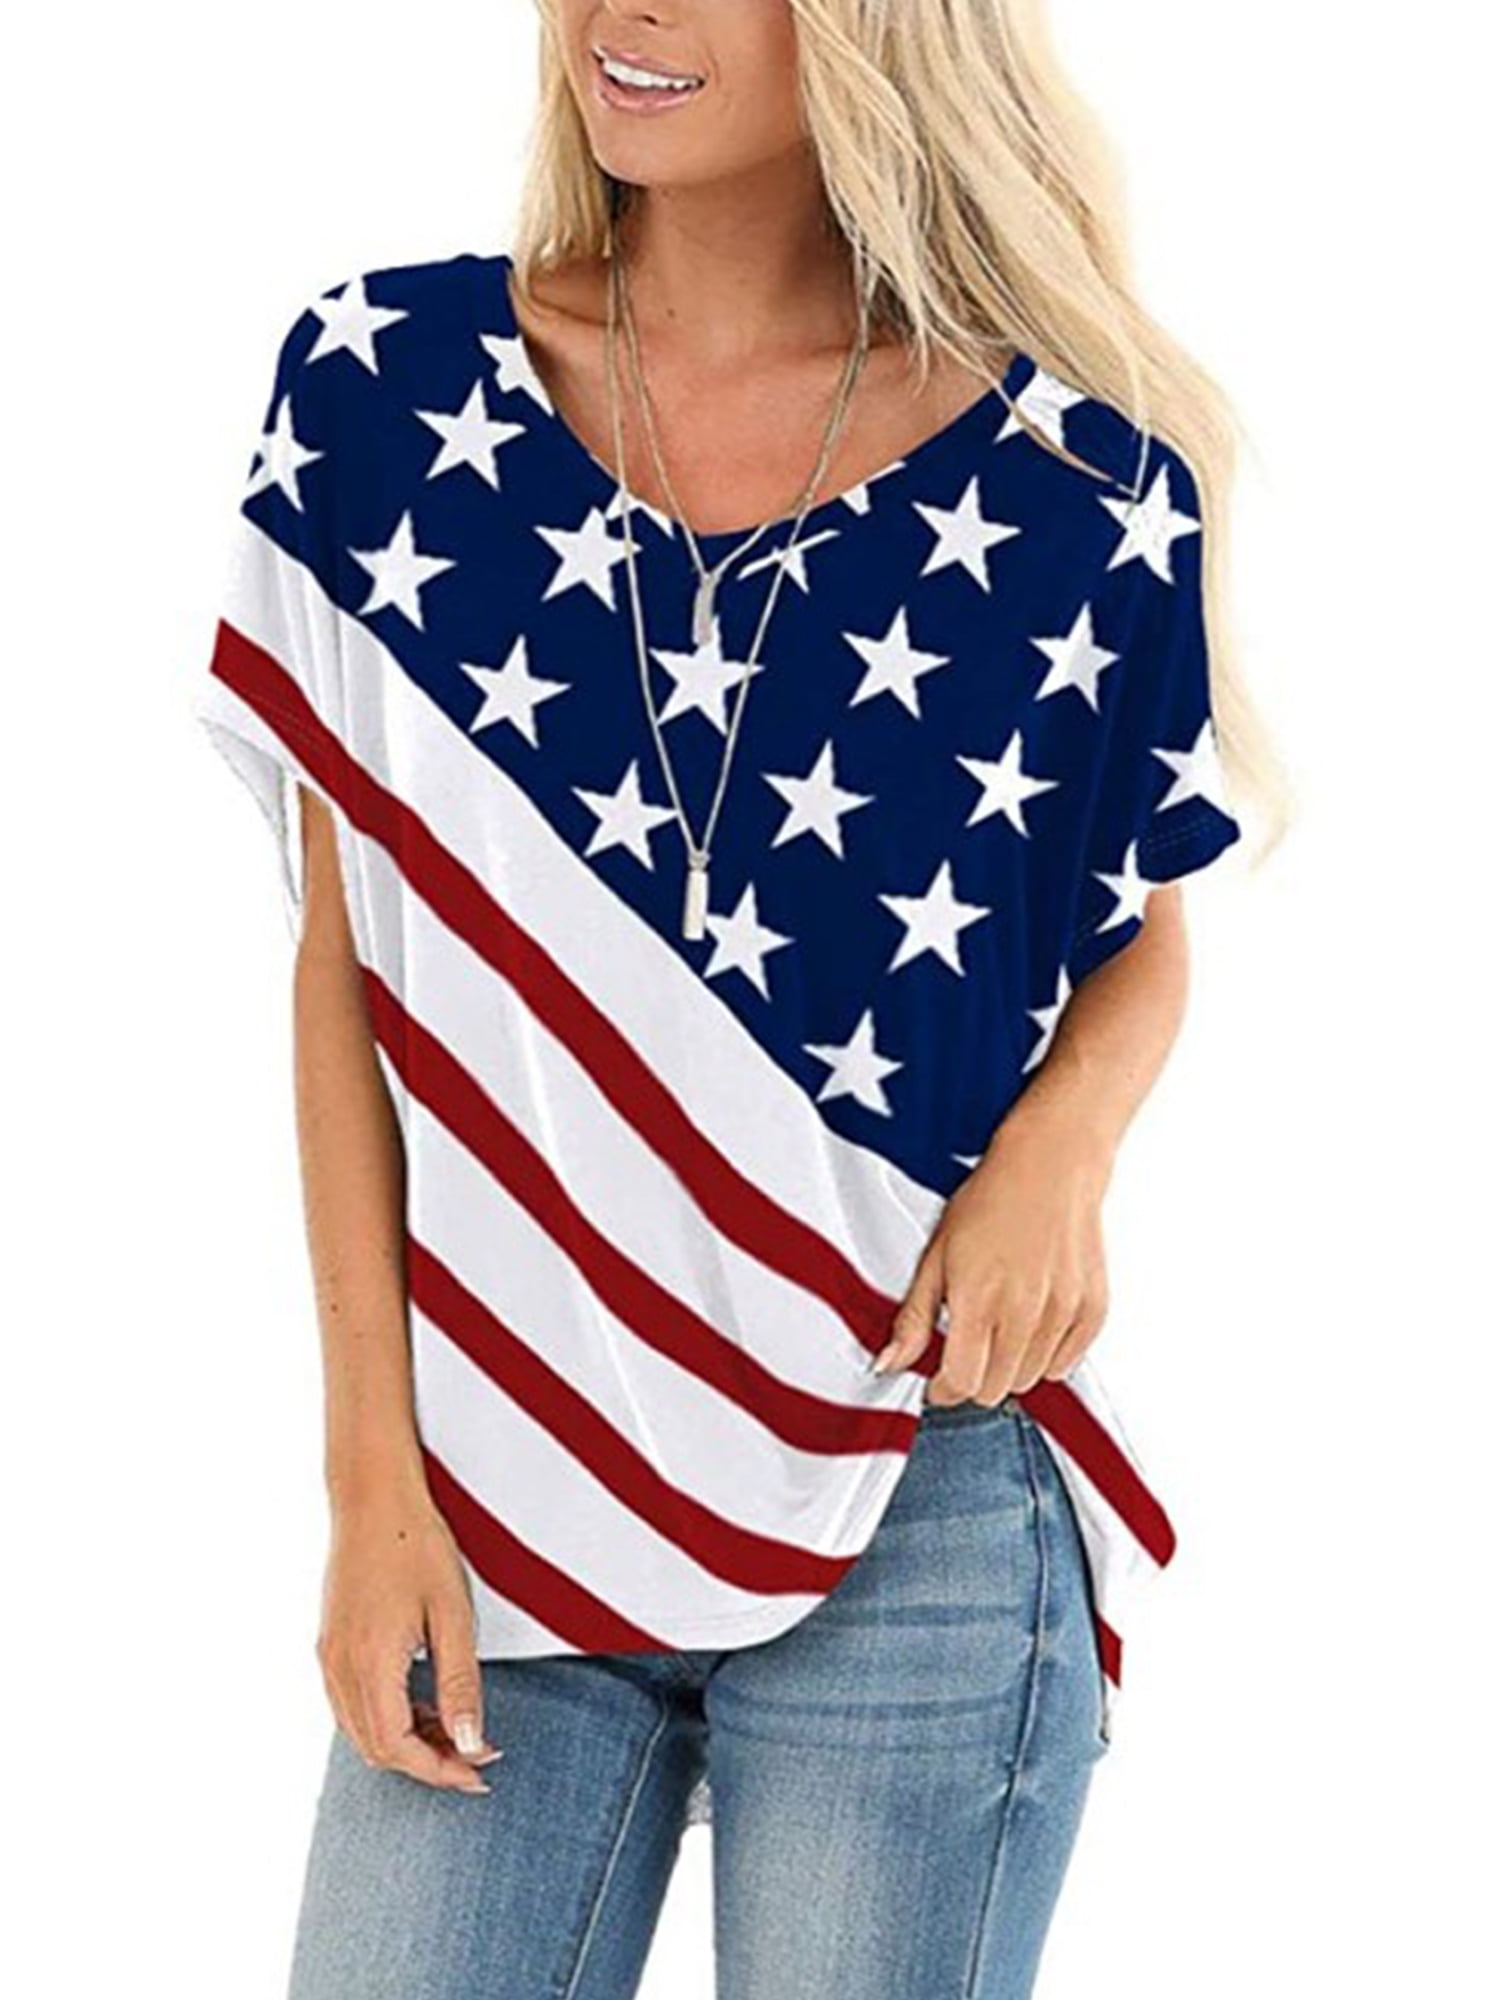 KLFGJ Women Plus Size T-Shirt,American Print Tees Casual Short Sleeve Blouse for USA 4th of July